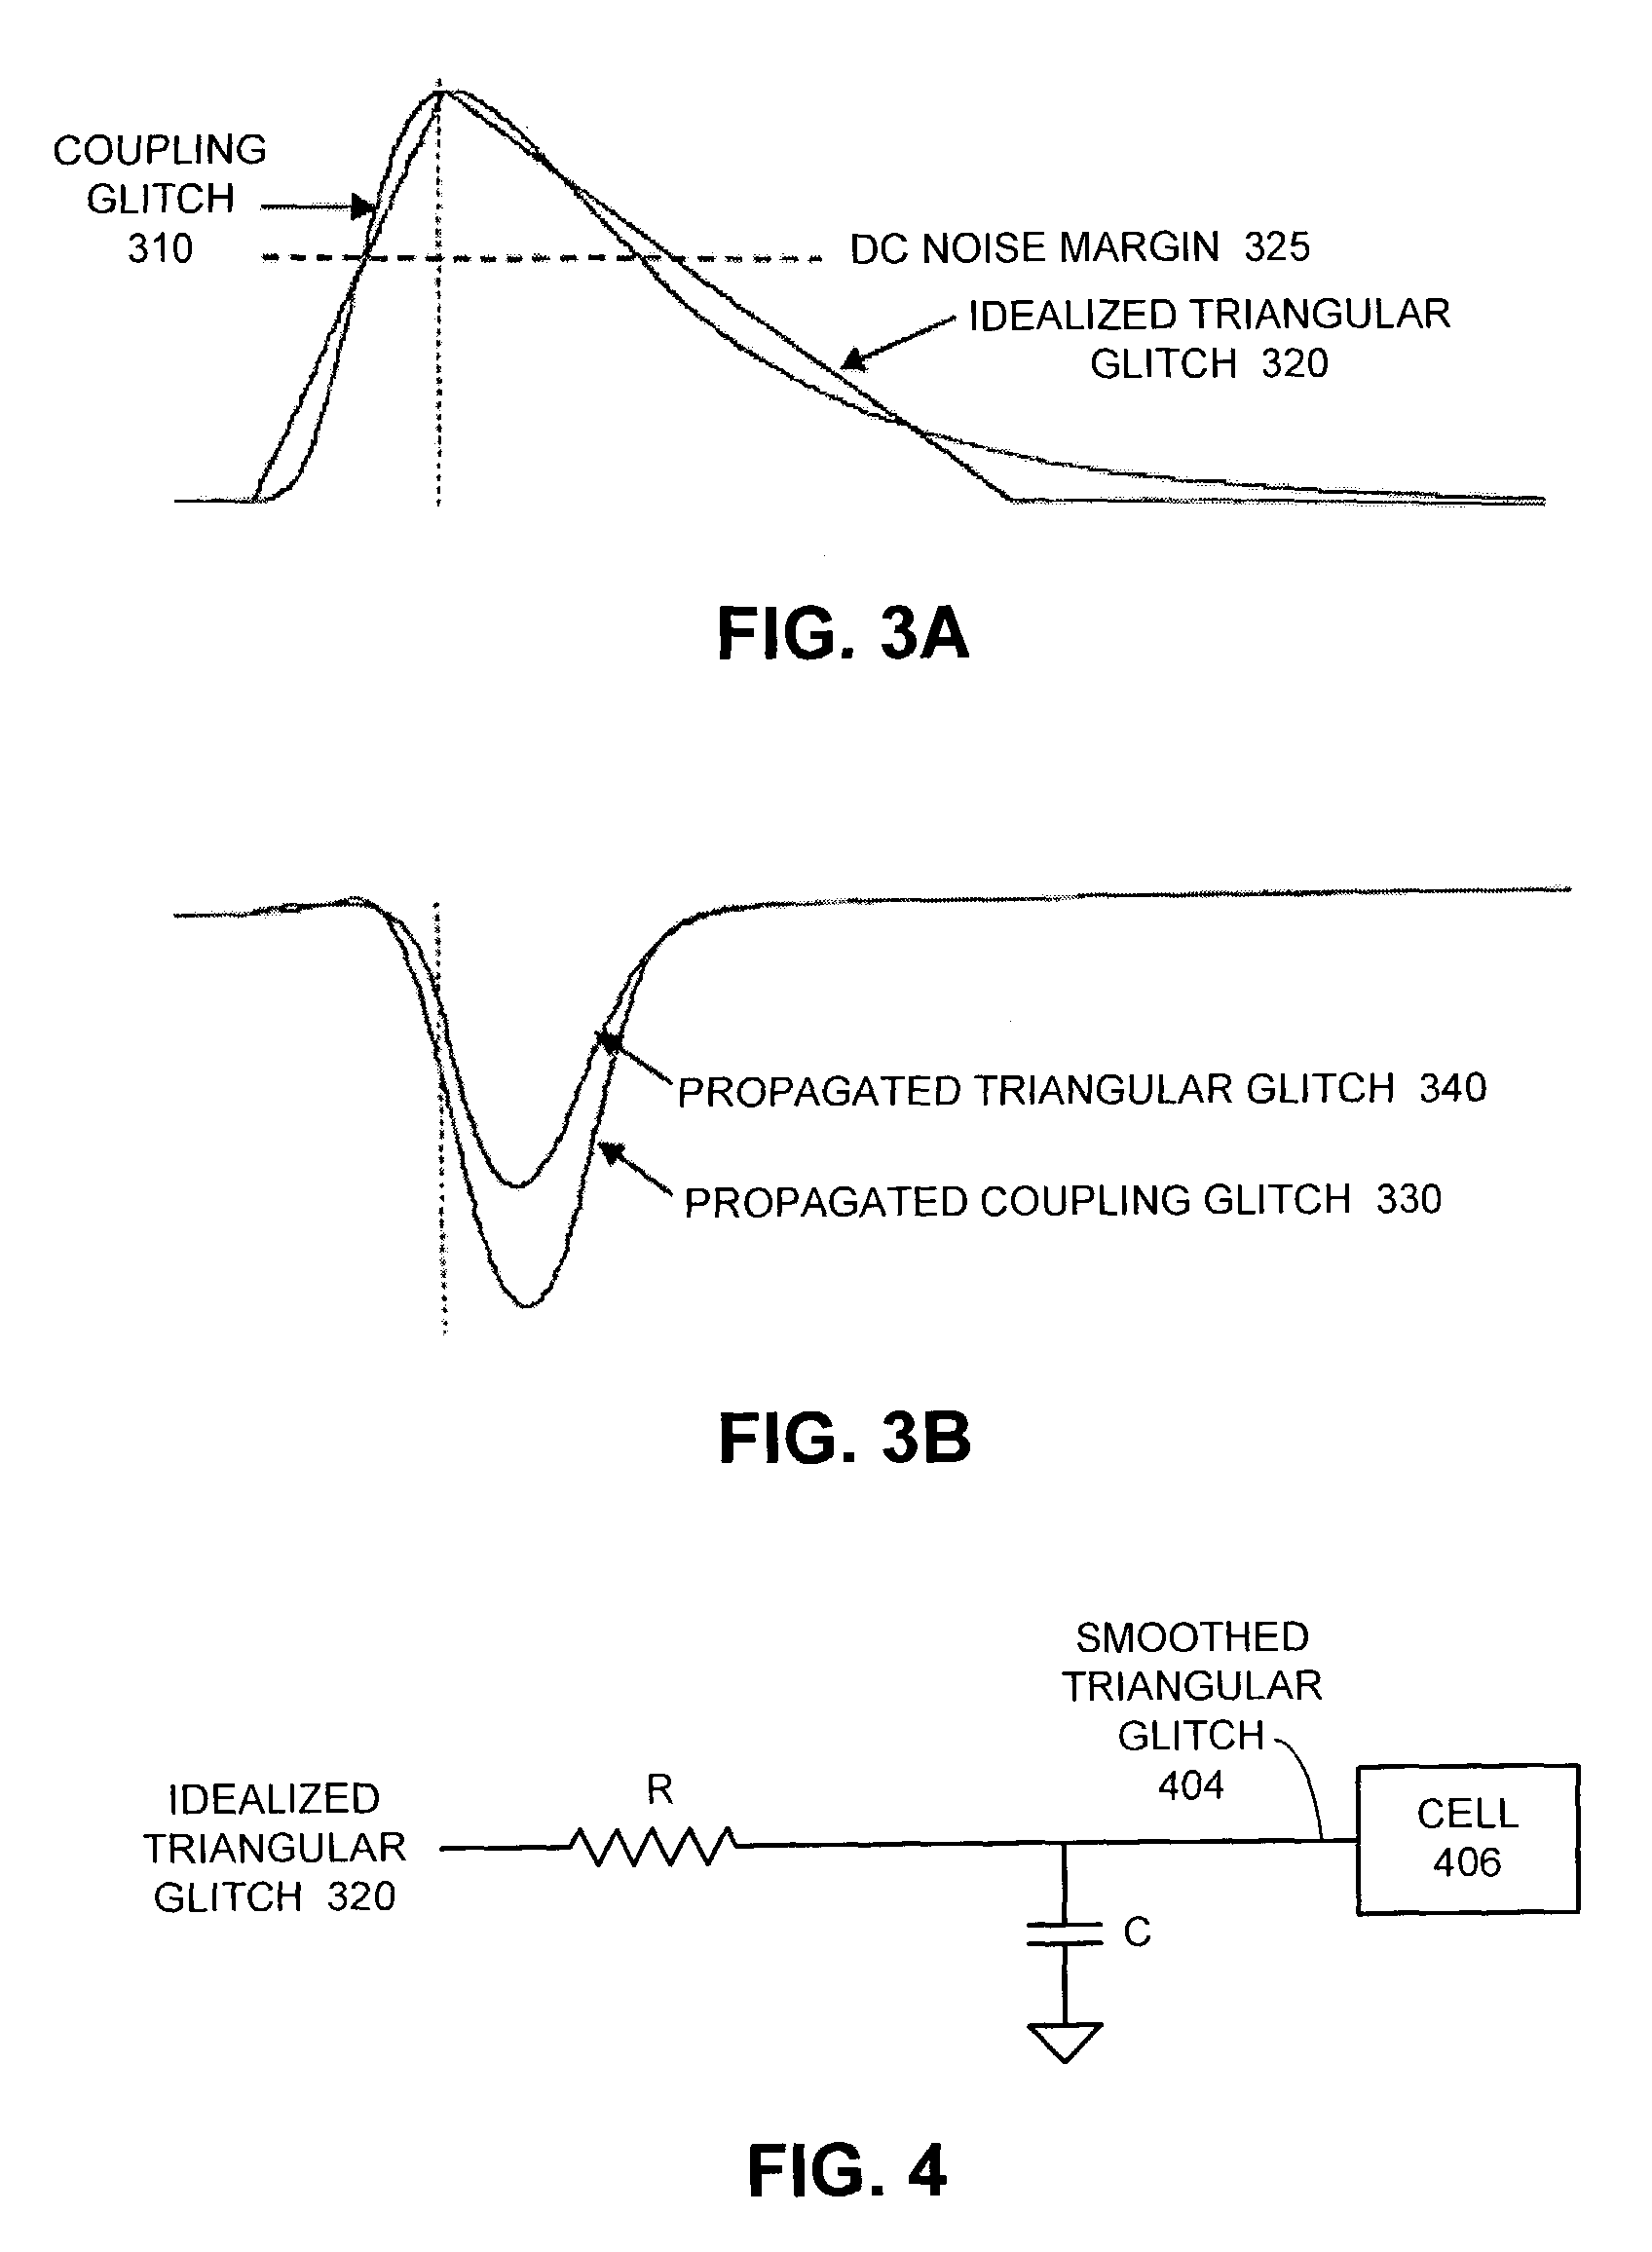 Method and apparatus for characterizing the propagation of noise through a cell in an integrated circuit